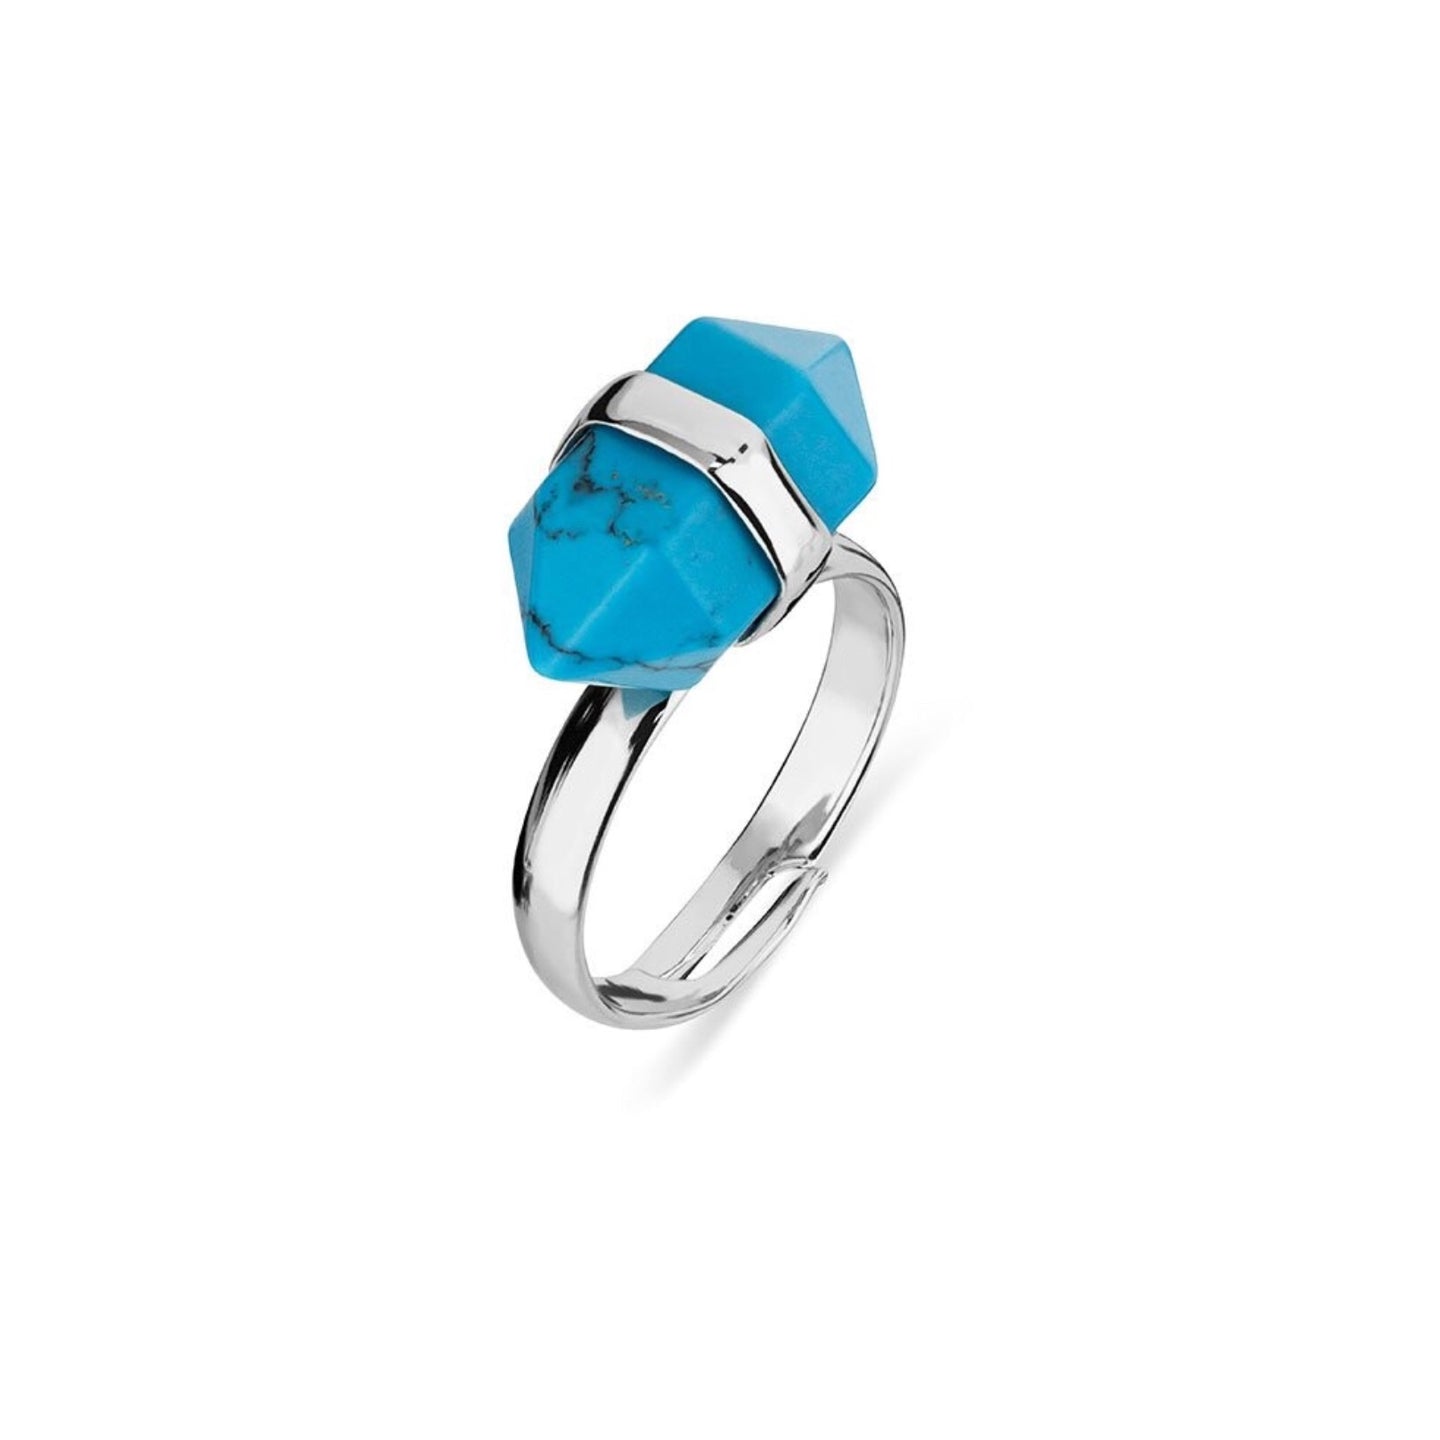 FASHION RING WITH TURQUOISE STONE